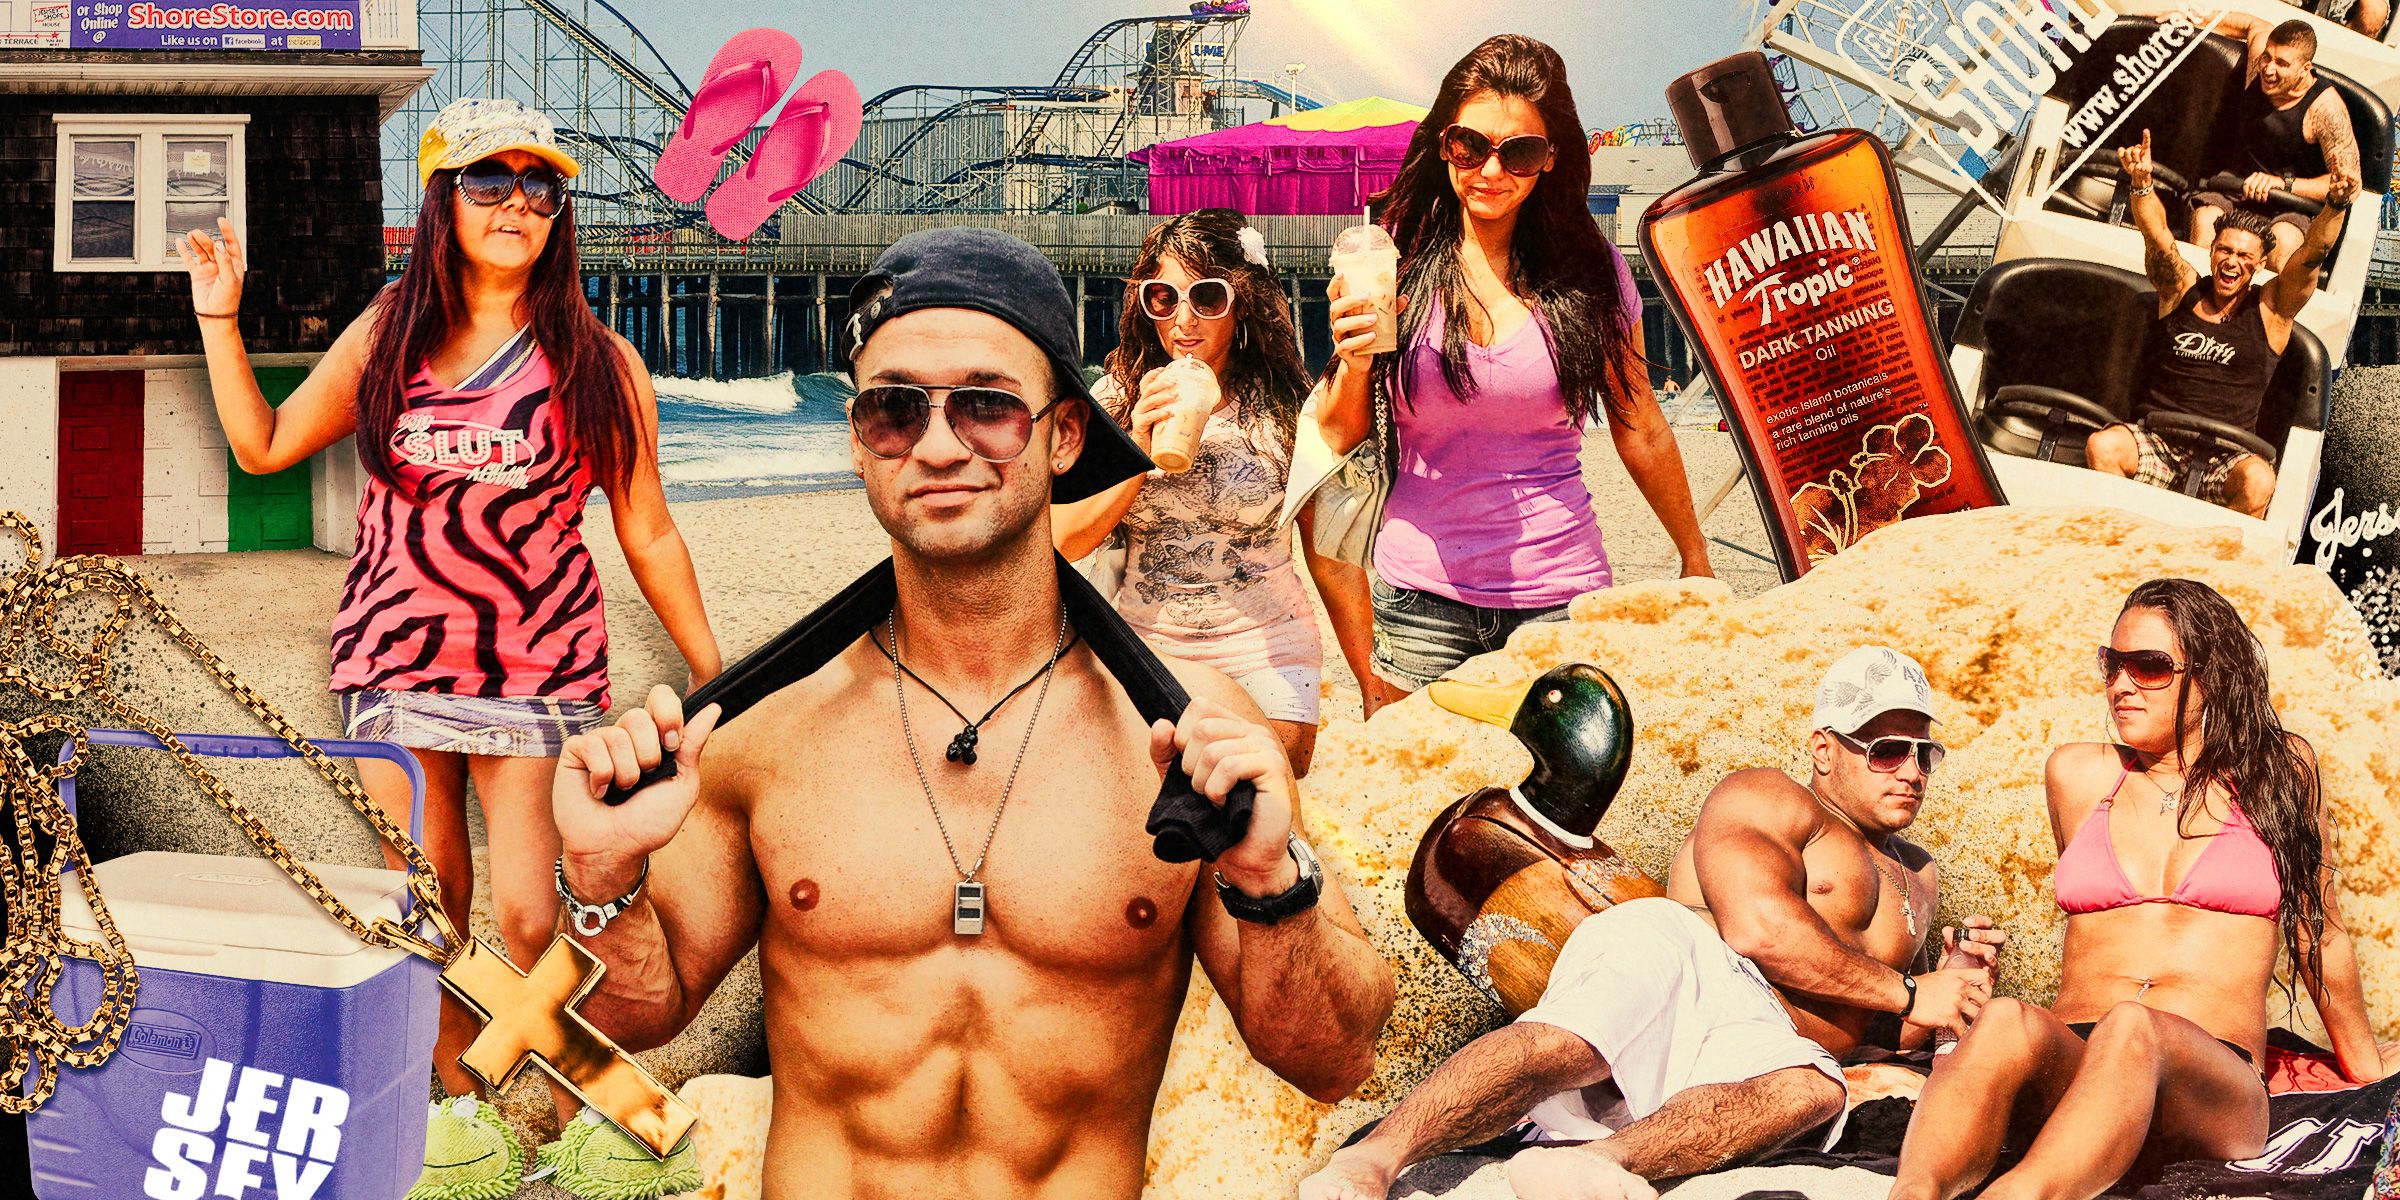 Jersey Shore The Oral History of MTVs Wildest Reality Show